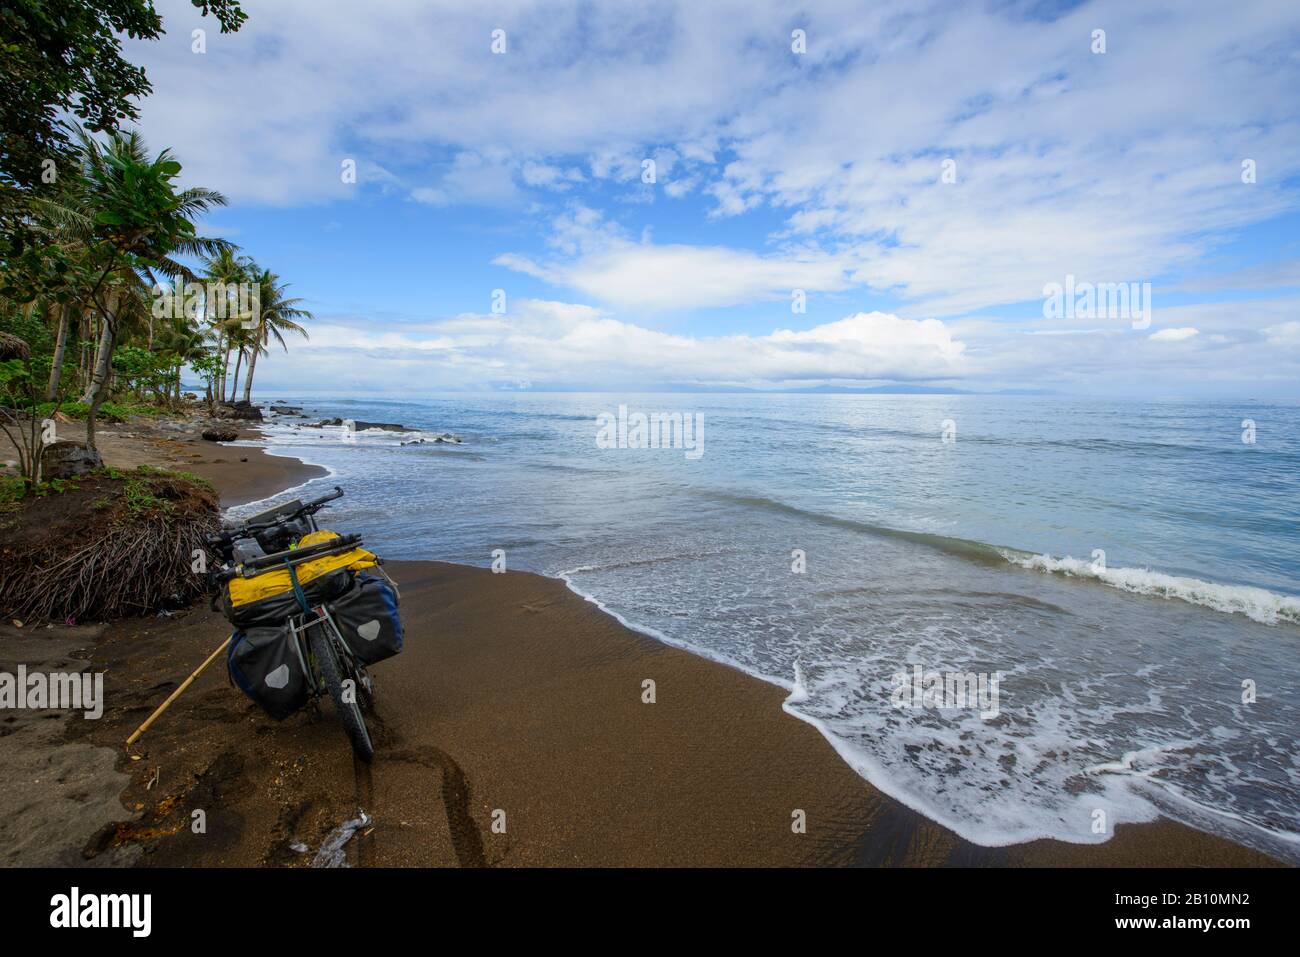 Bicycle on the beach of the Caramoan Peninsula, Southern Luzon, Philippines Stock Photo